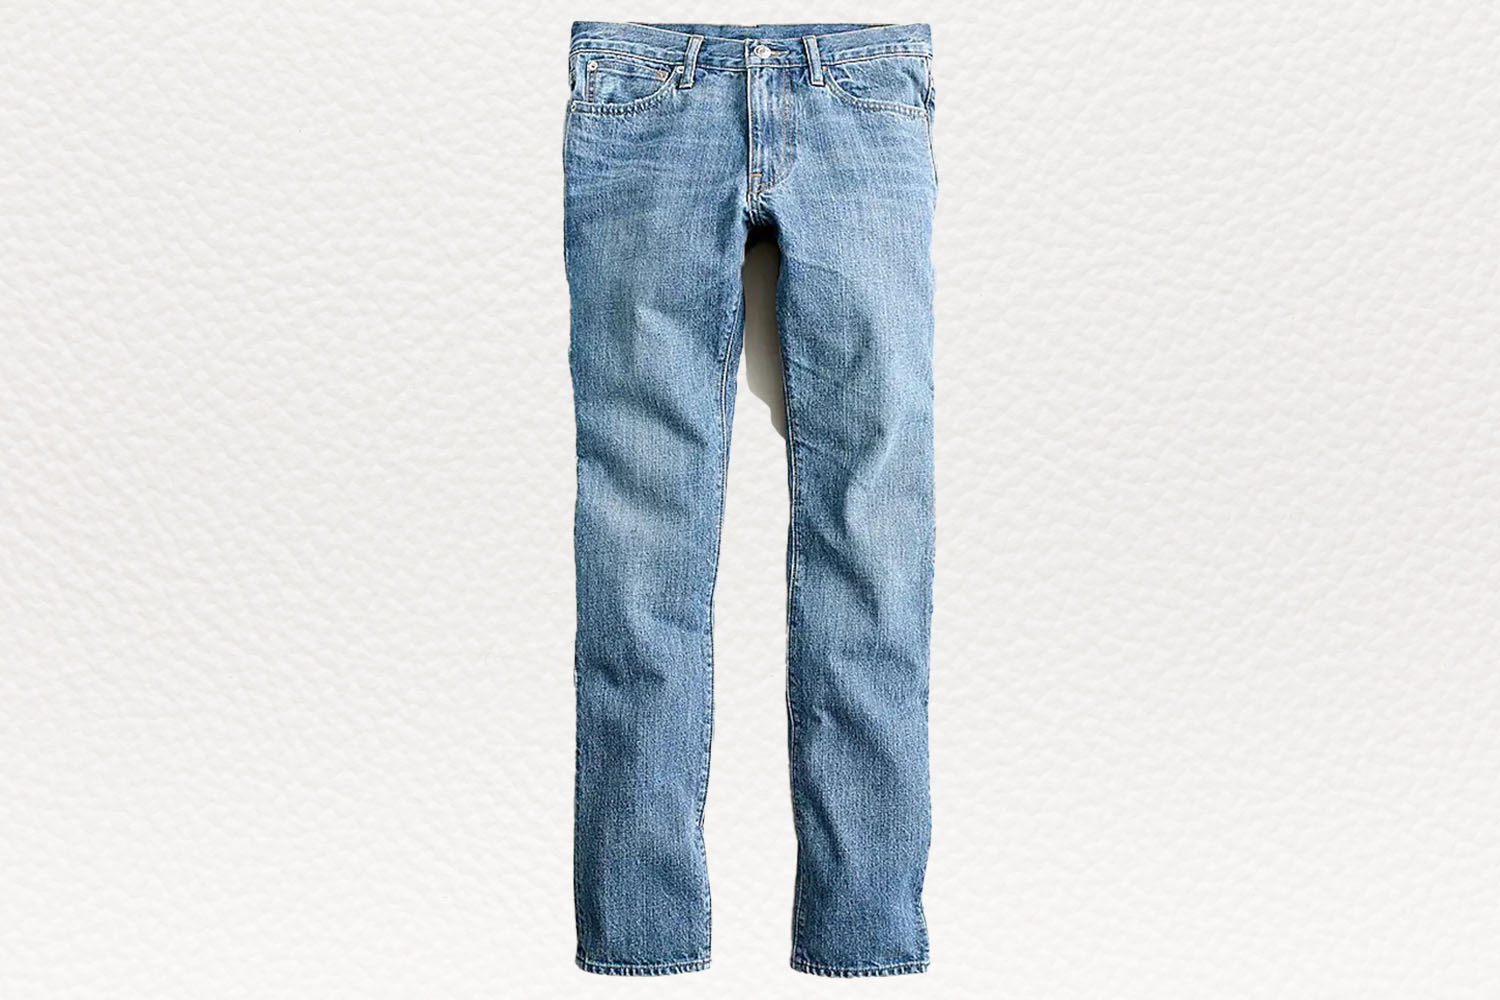 a pair of lightwash J.Crew jeans on a white textured background